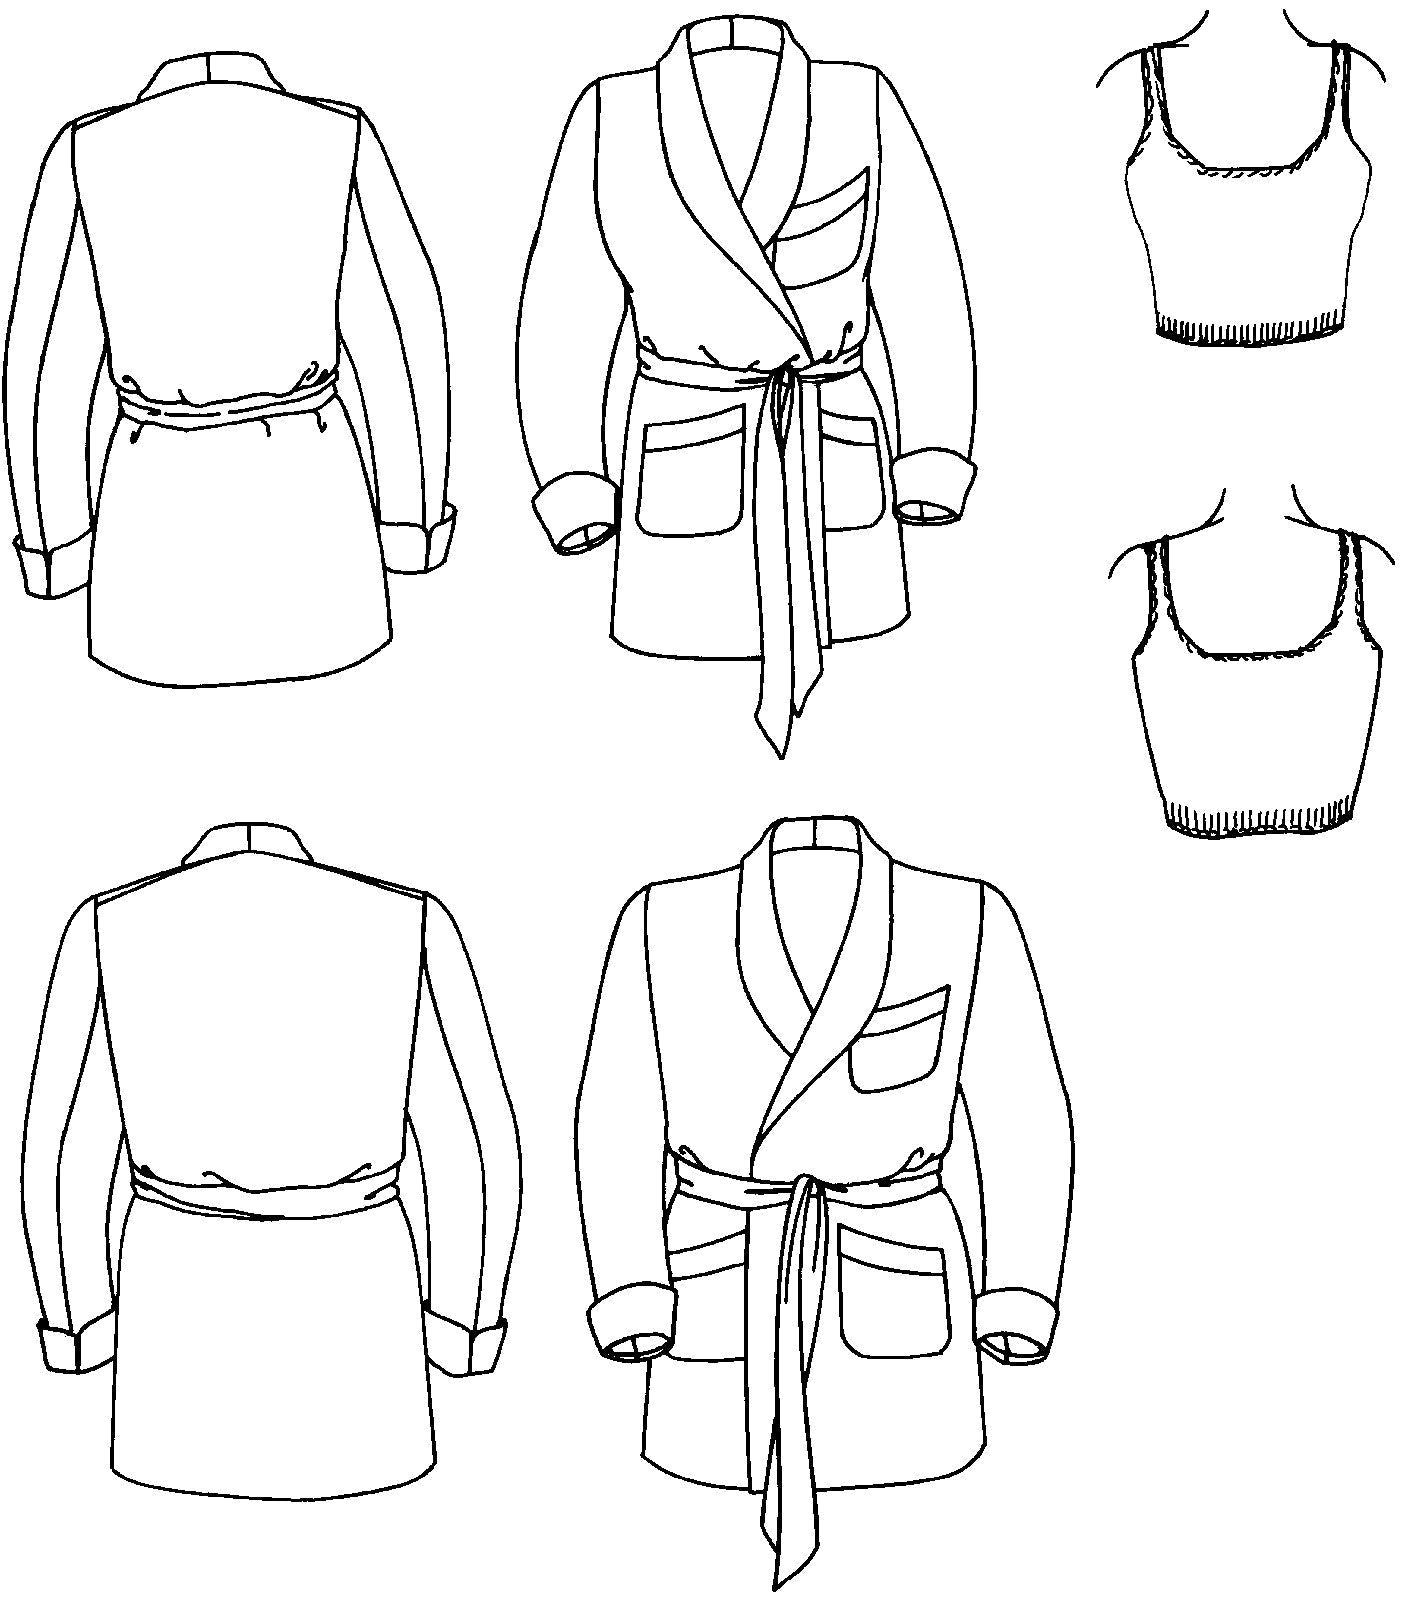 Black and white pattern drawing of front and back view of the men and women's 238 Le Smoking jacket and women's Knitted Tank top.